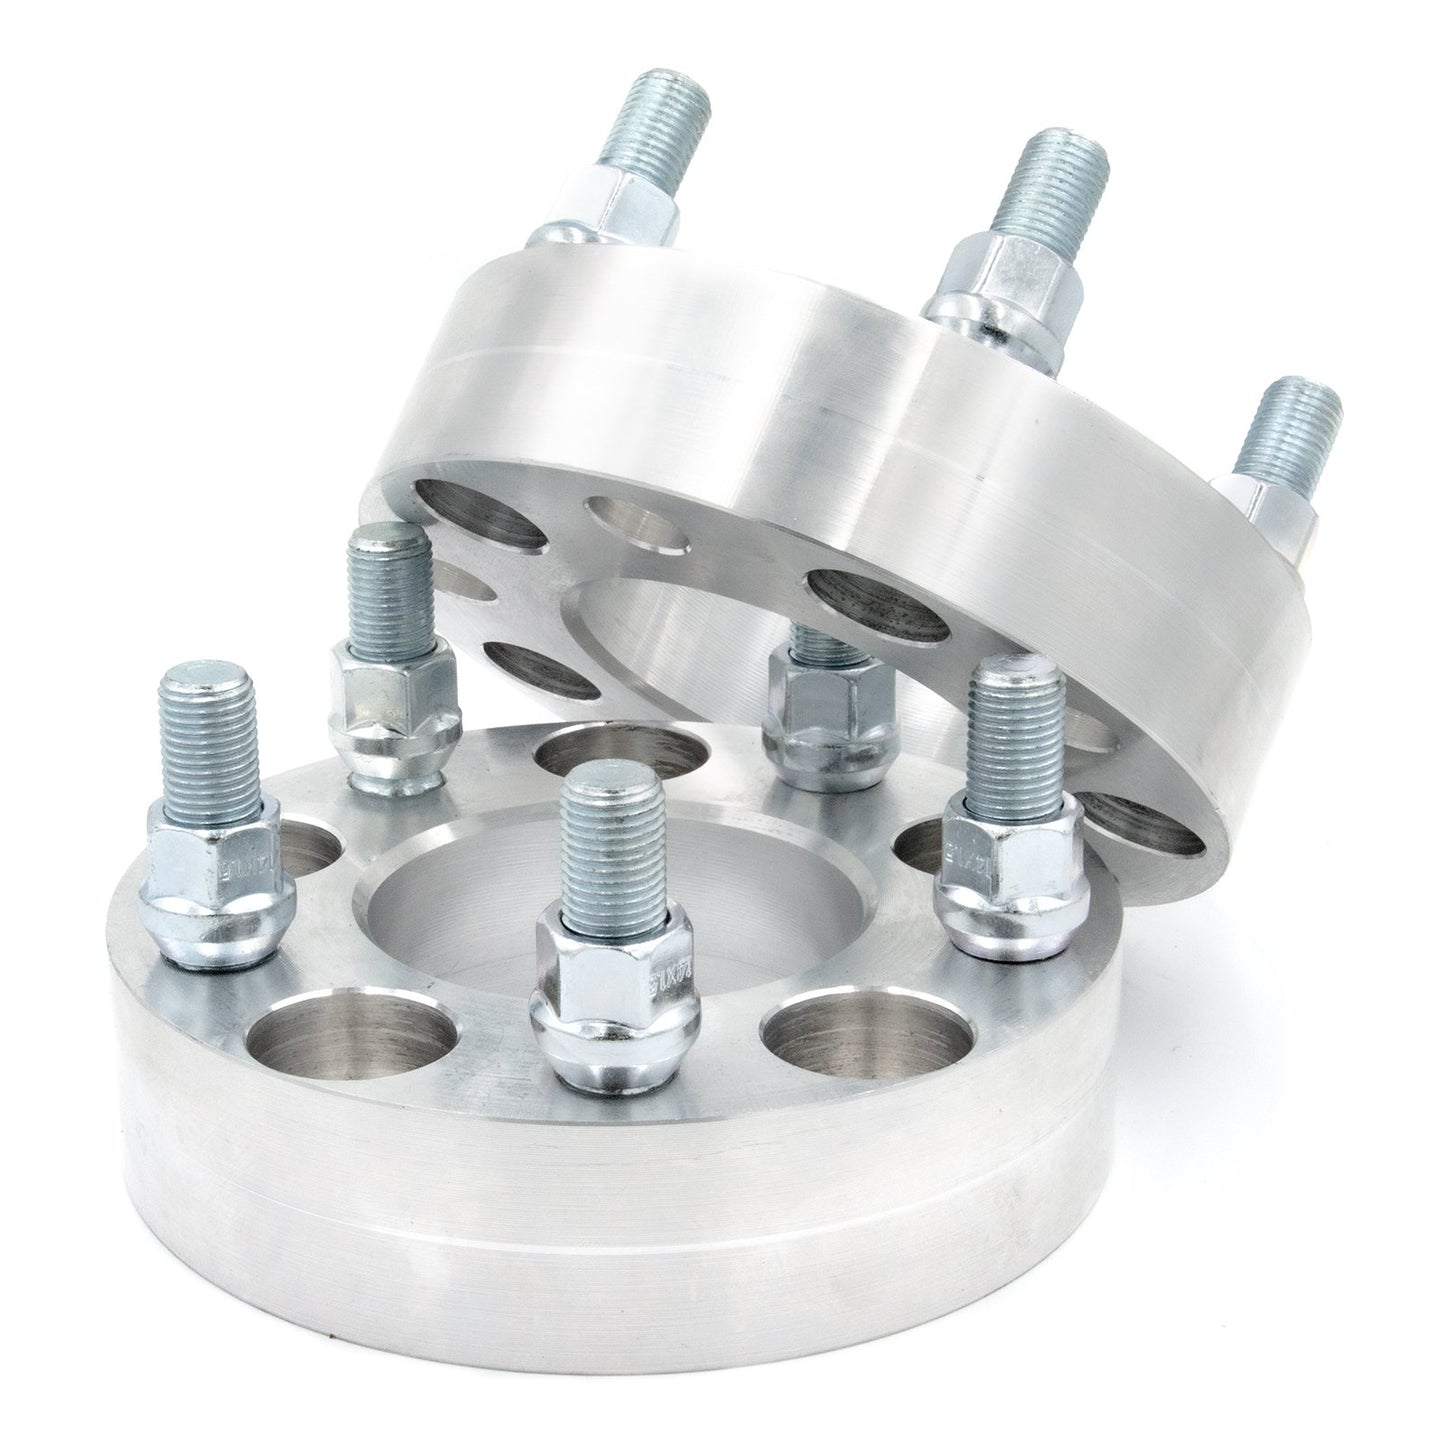 5x120 to 5x110 Wheel Spacer/Adapter - Thickness: 3/4"- 4"